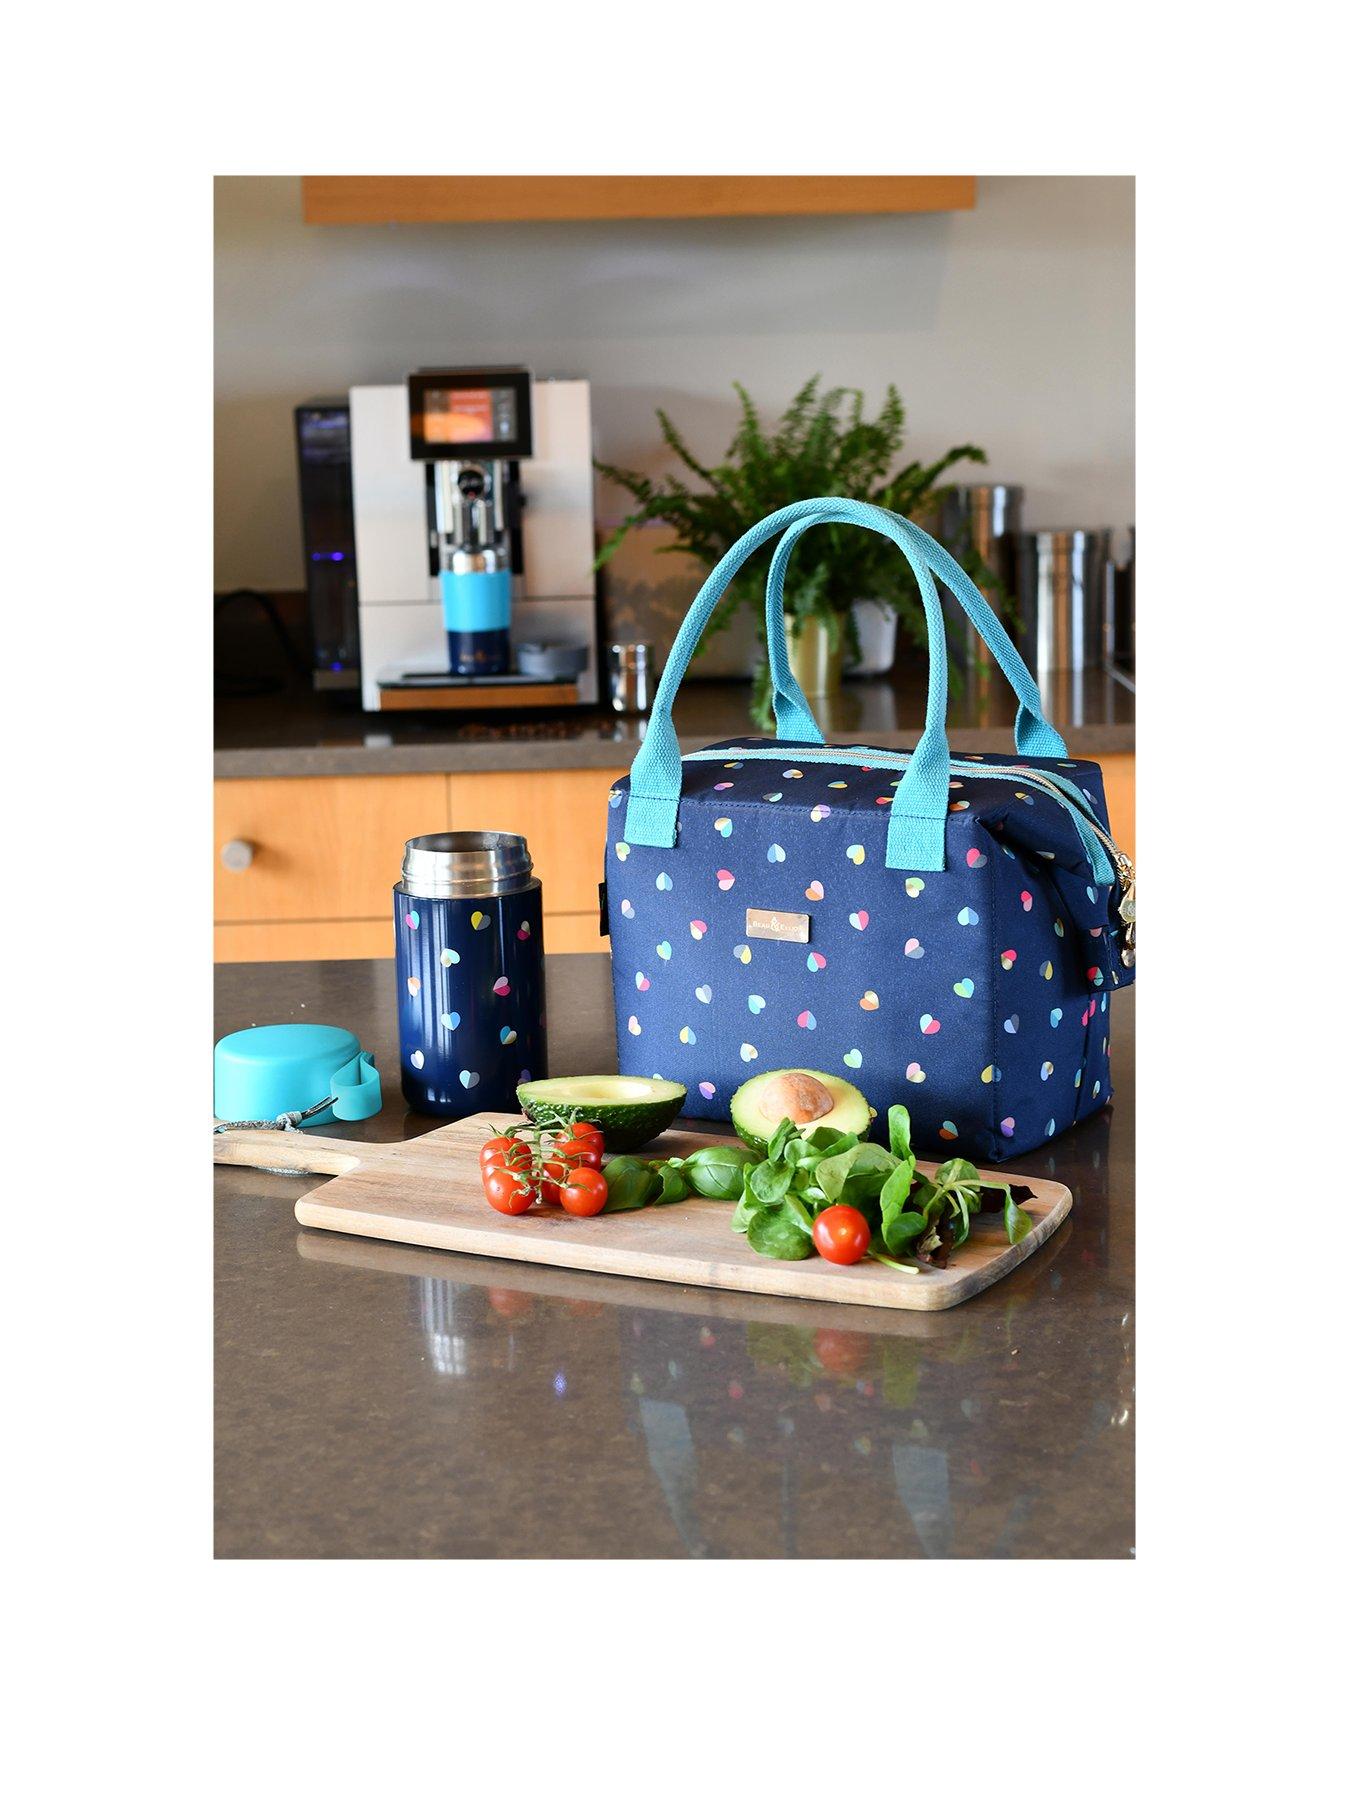 Accessory Innovations, Accessories, Bluey Kids Lunch Bag Blue